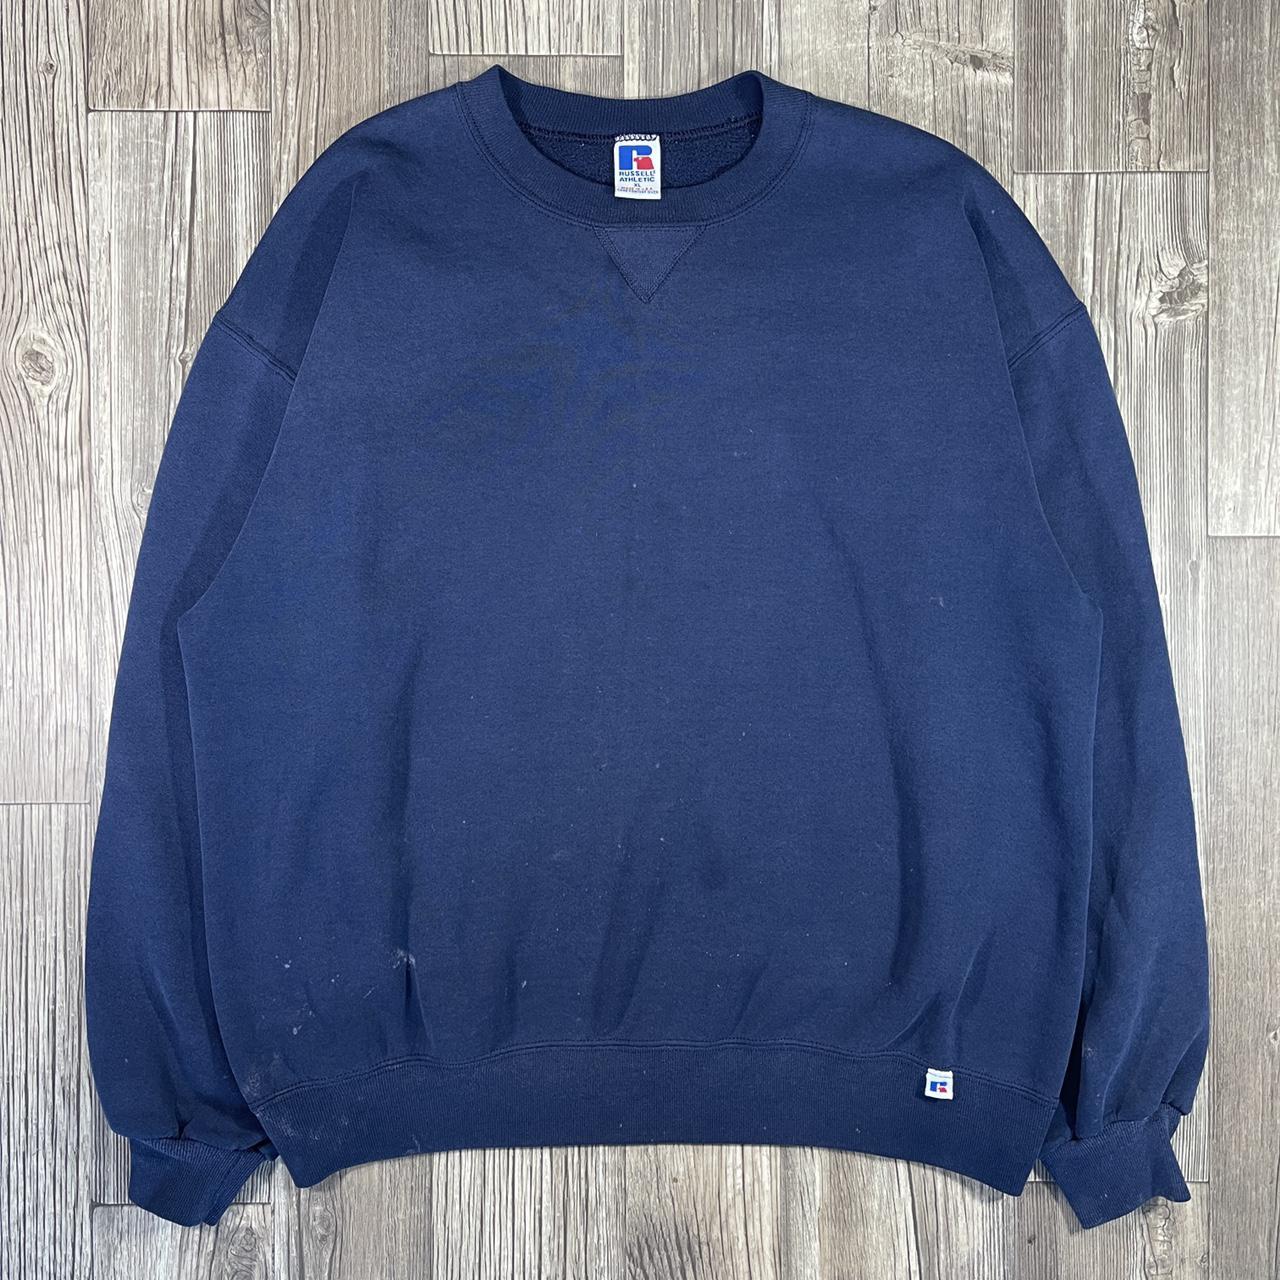 Russell Athletic Men's Navy and White Sweatshirt